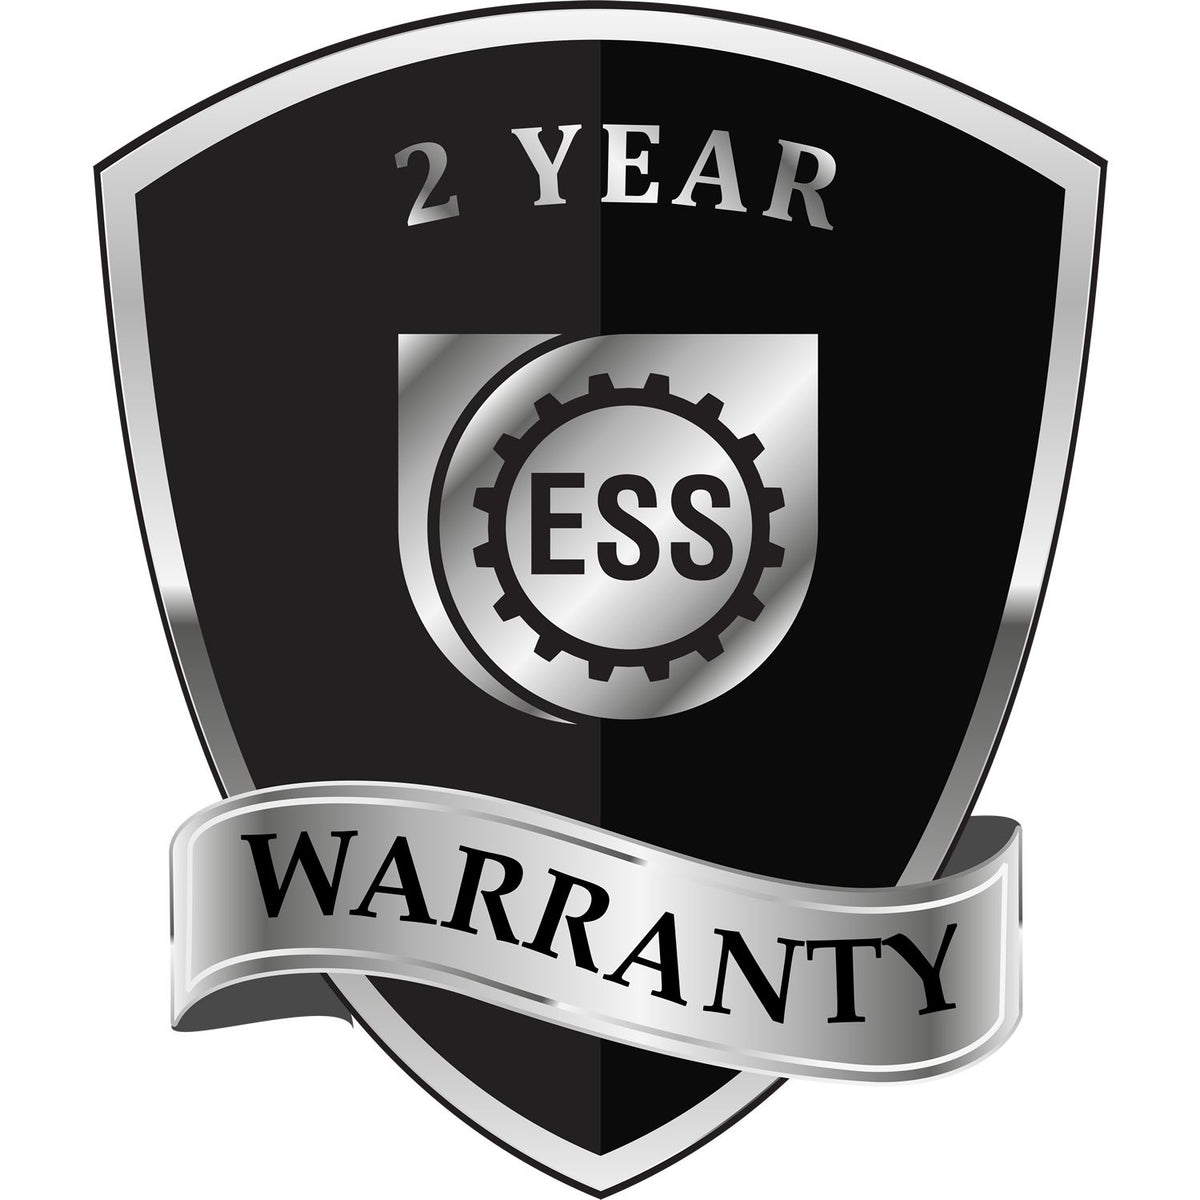 A black and silver badge or emblem showing warranty information for the State of New Mexico Extended Long Reach Geologist Seal